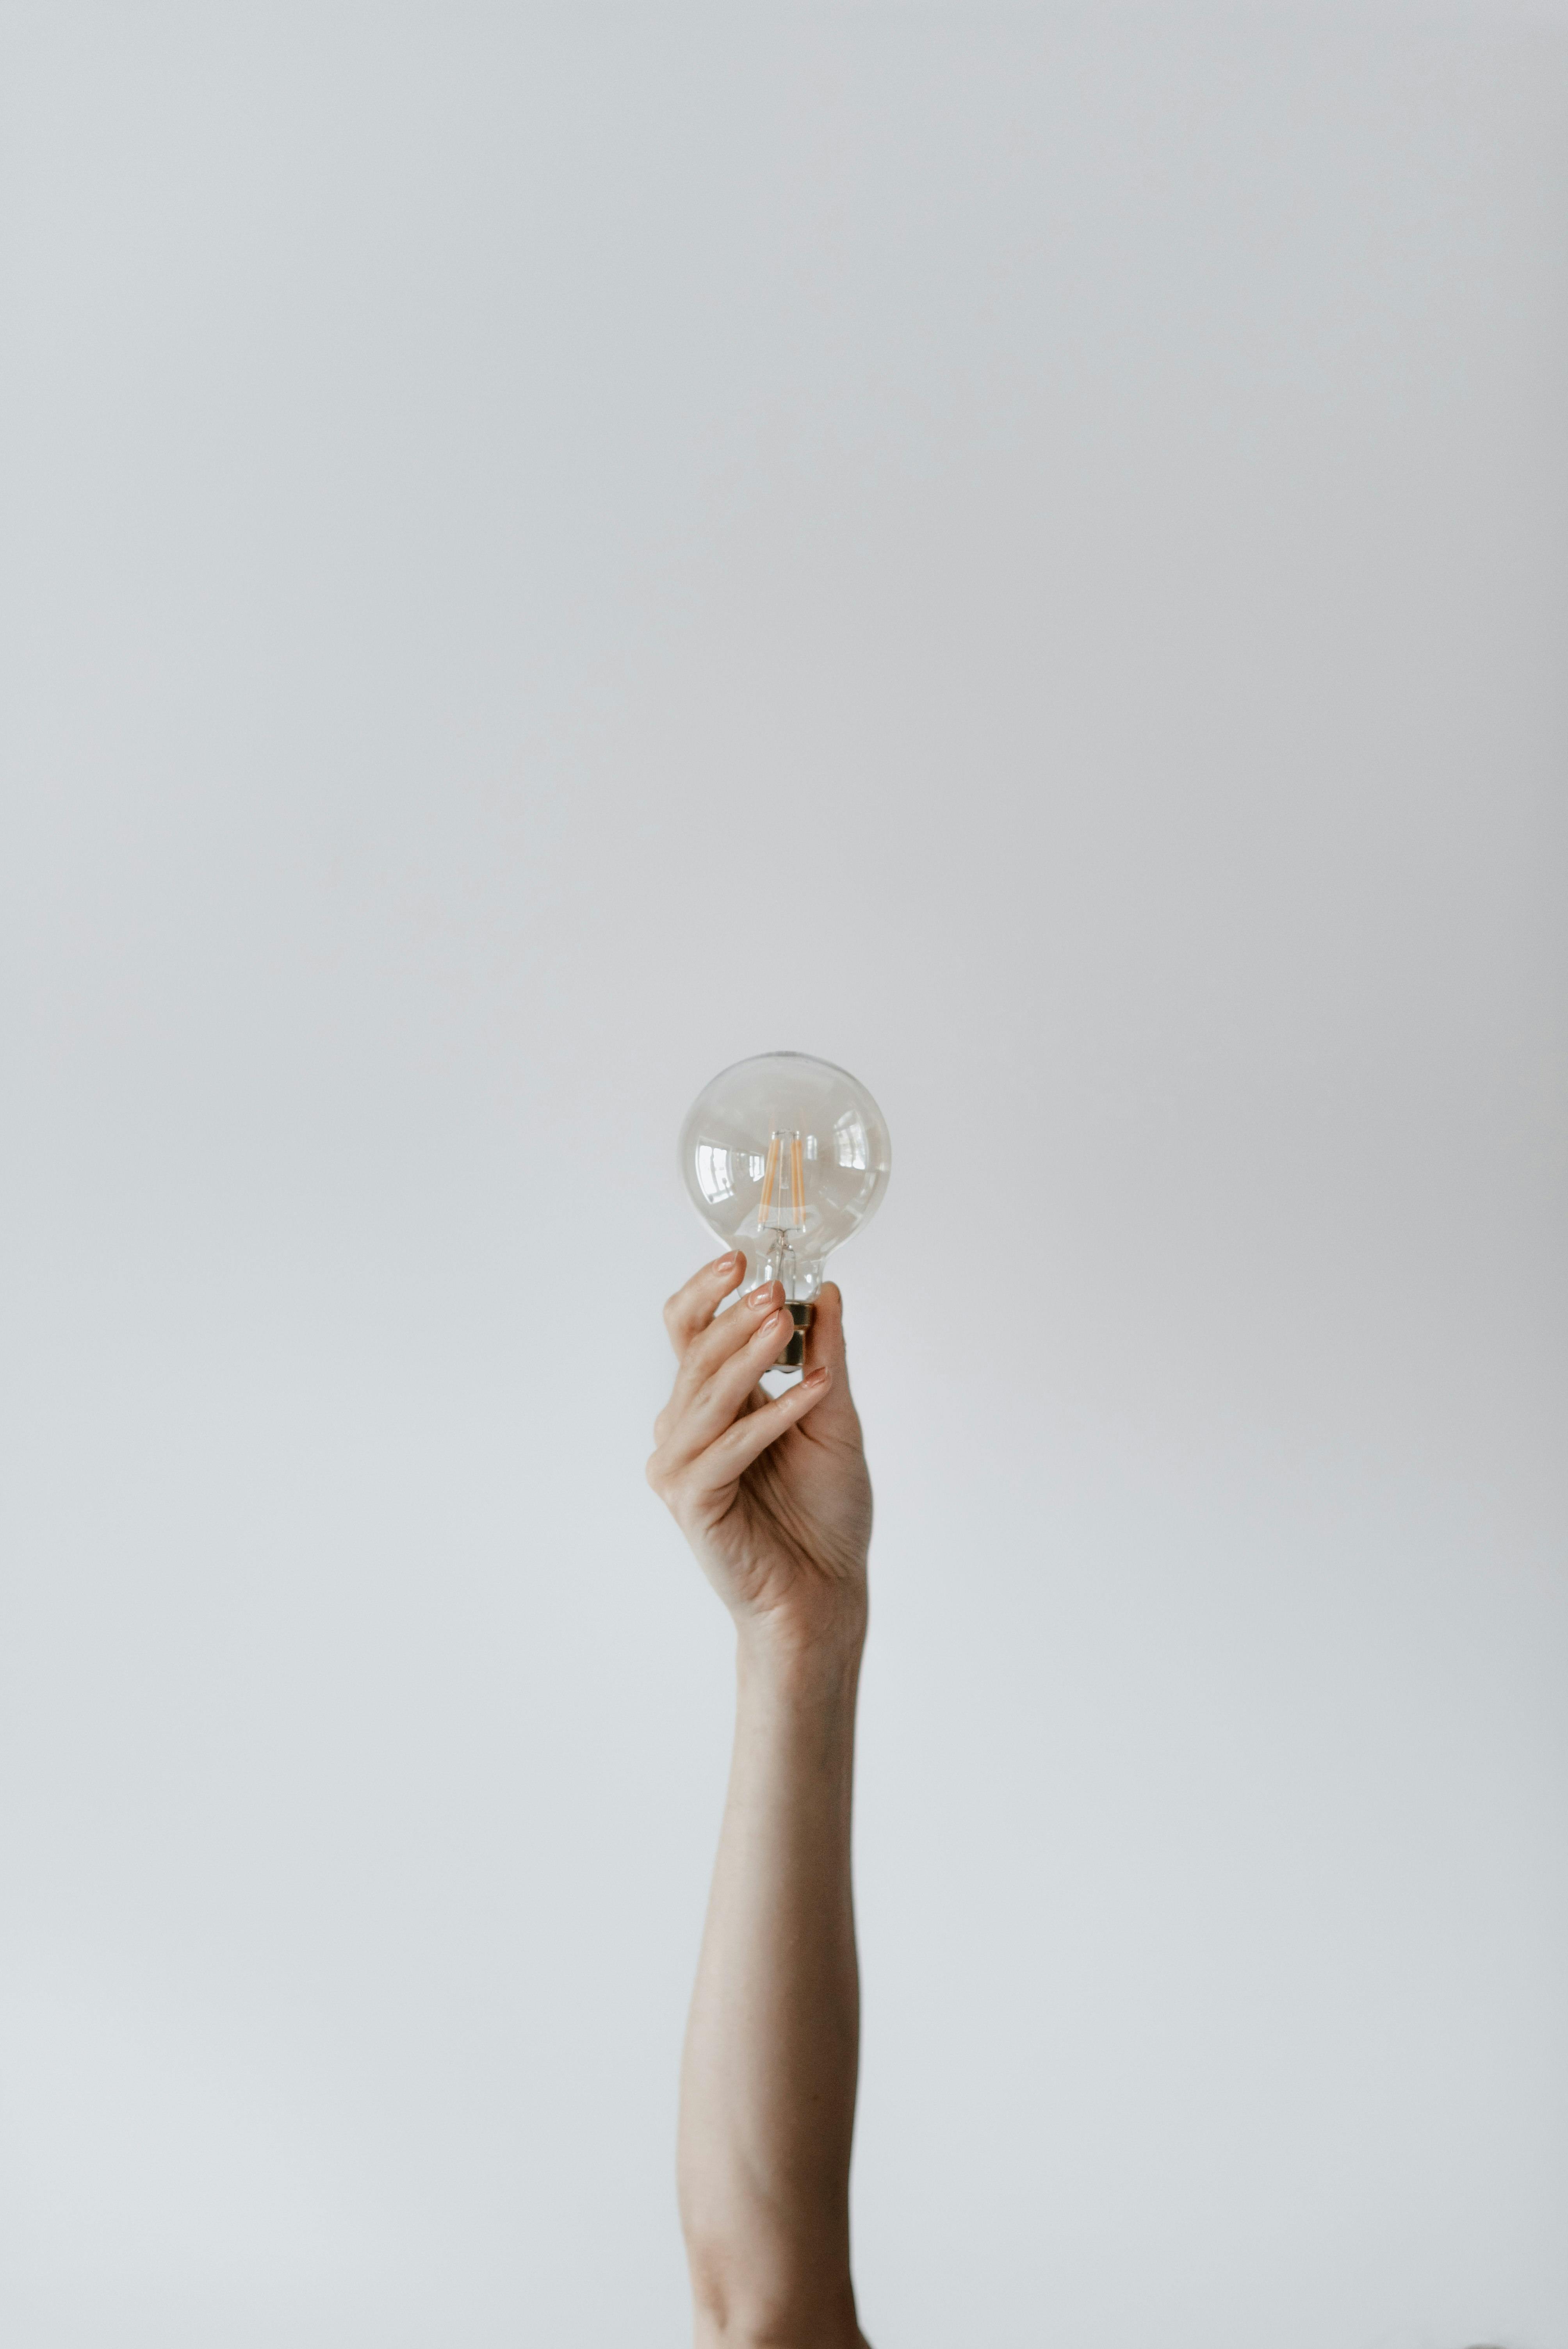 anonymous female showing light bulb